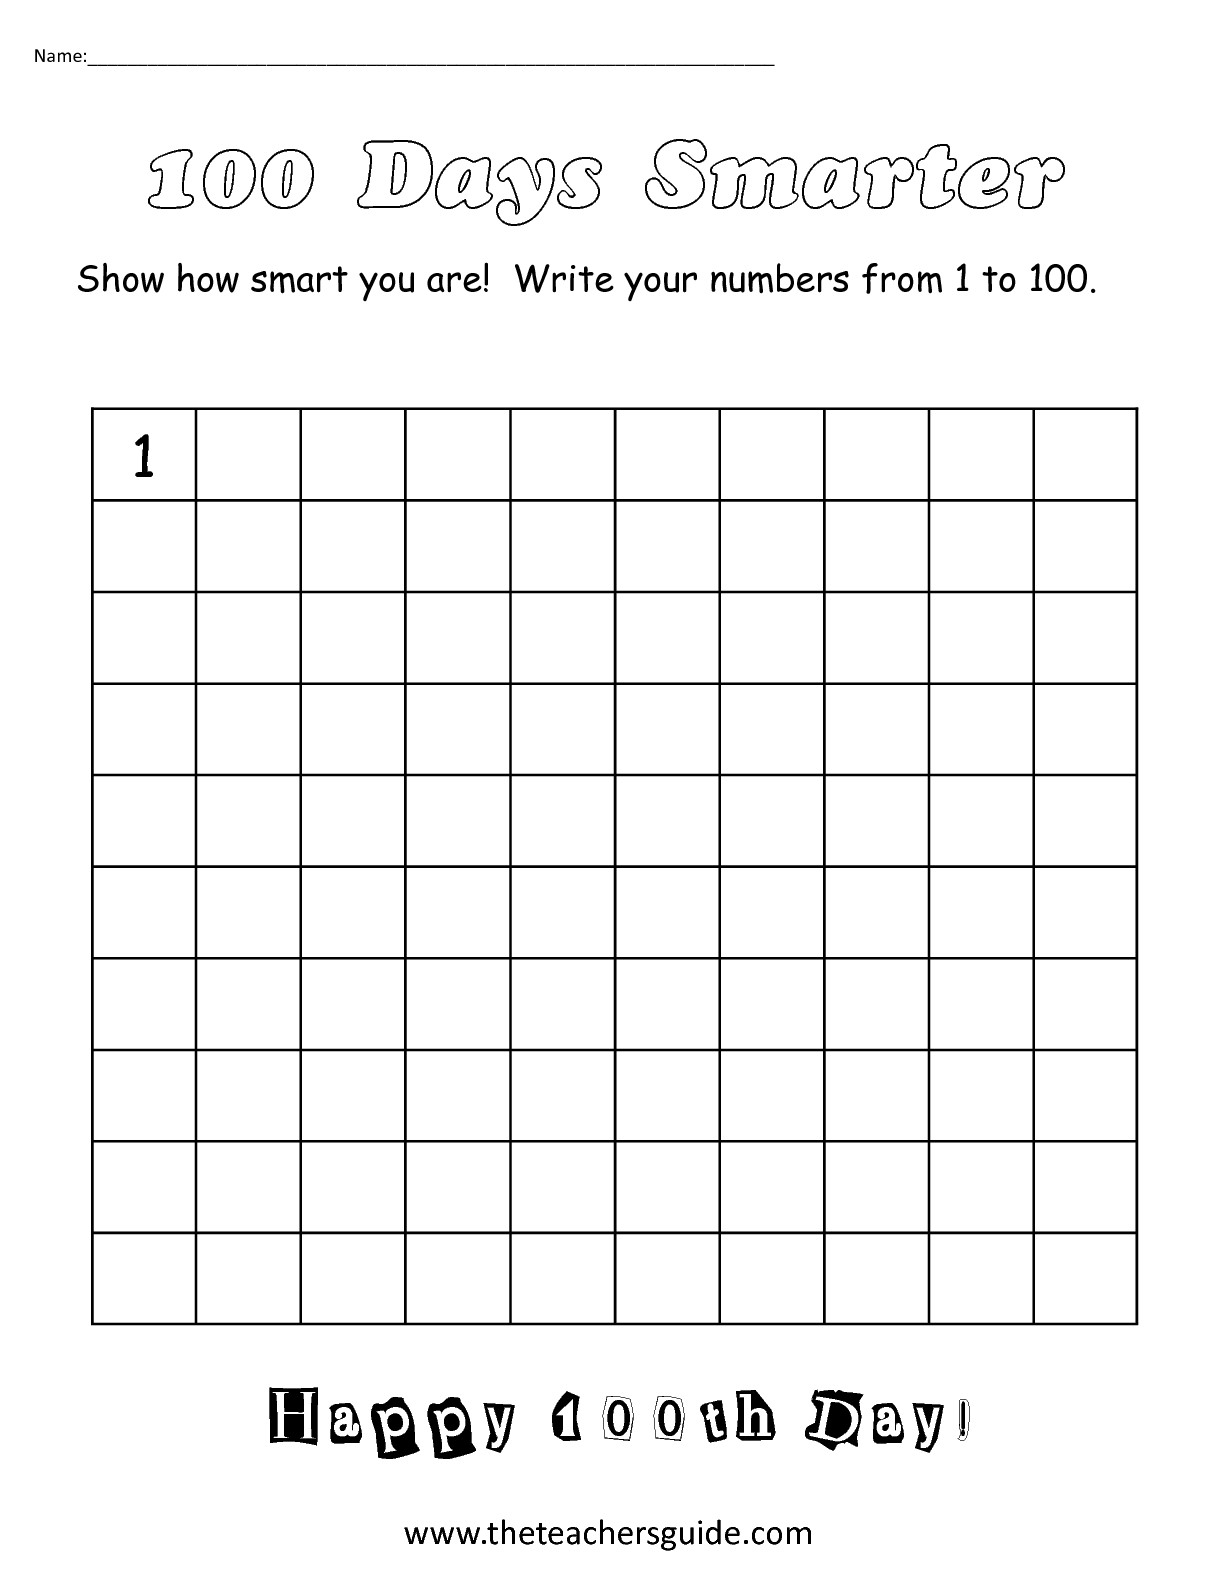 Write Numbers From 1 To 100 Worksheet